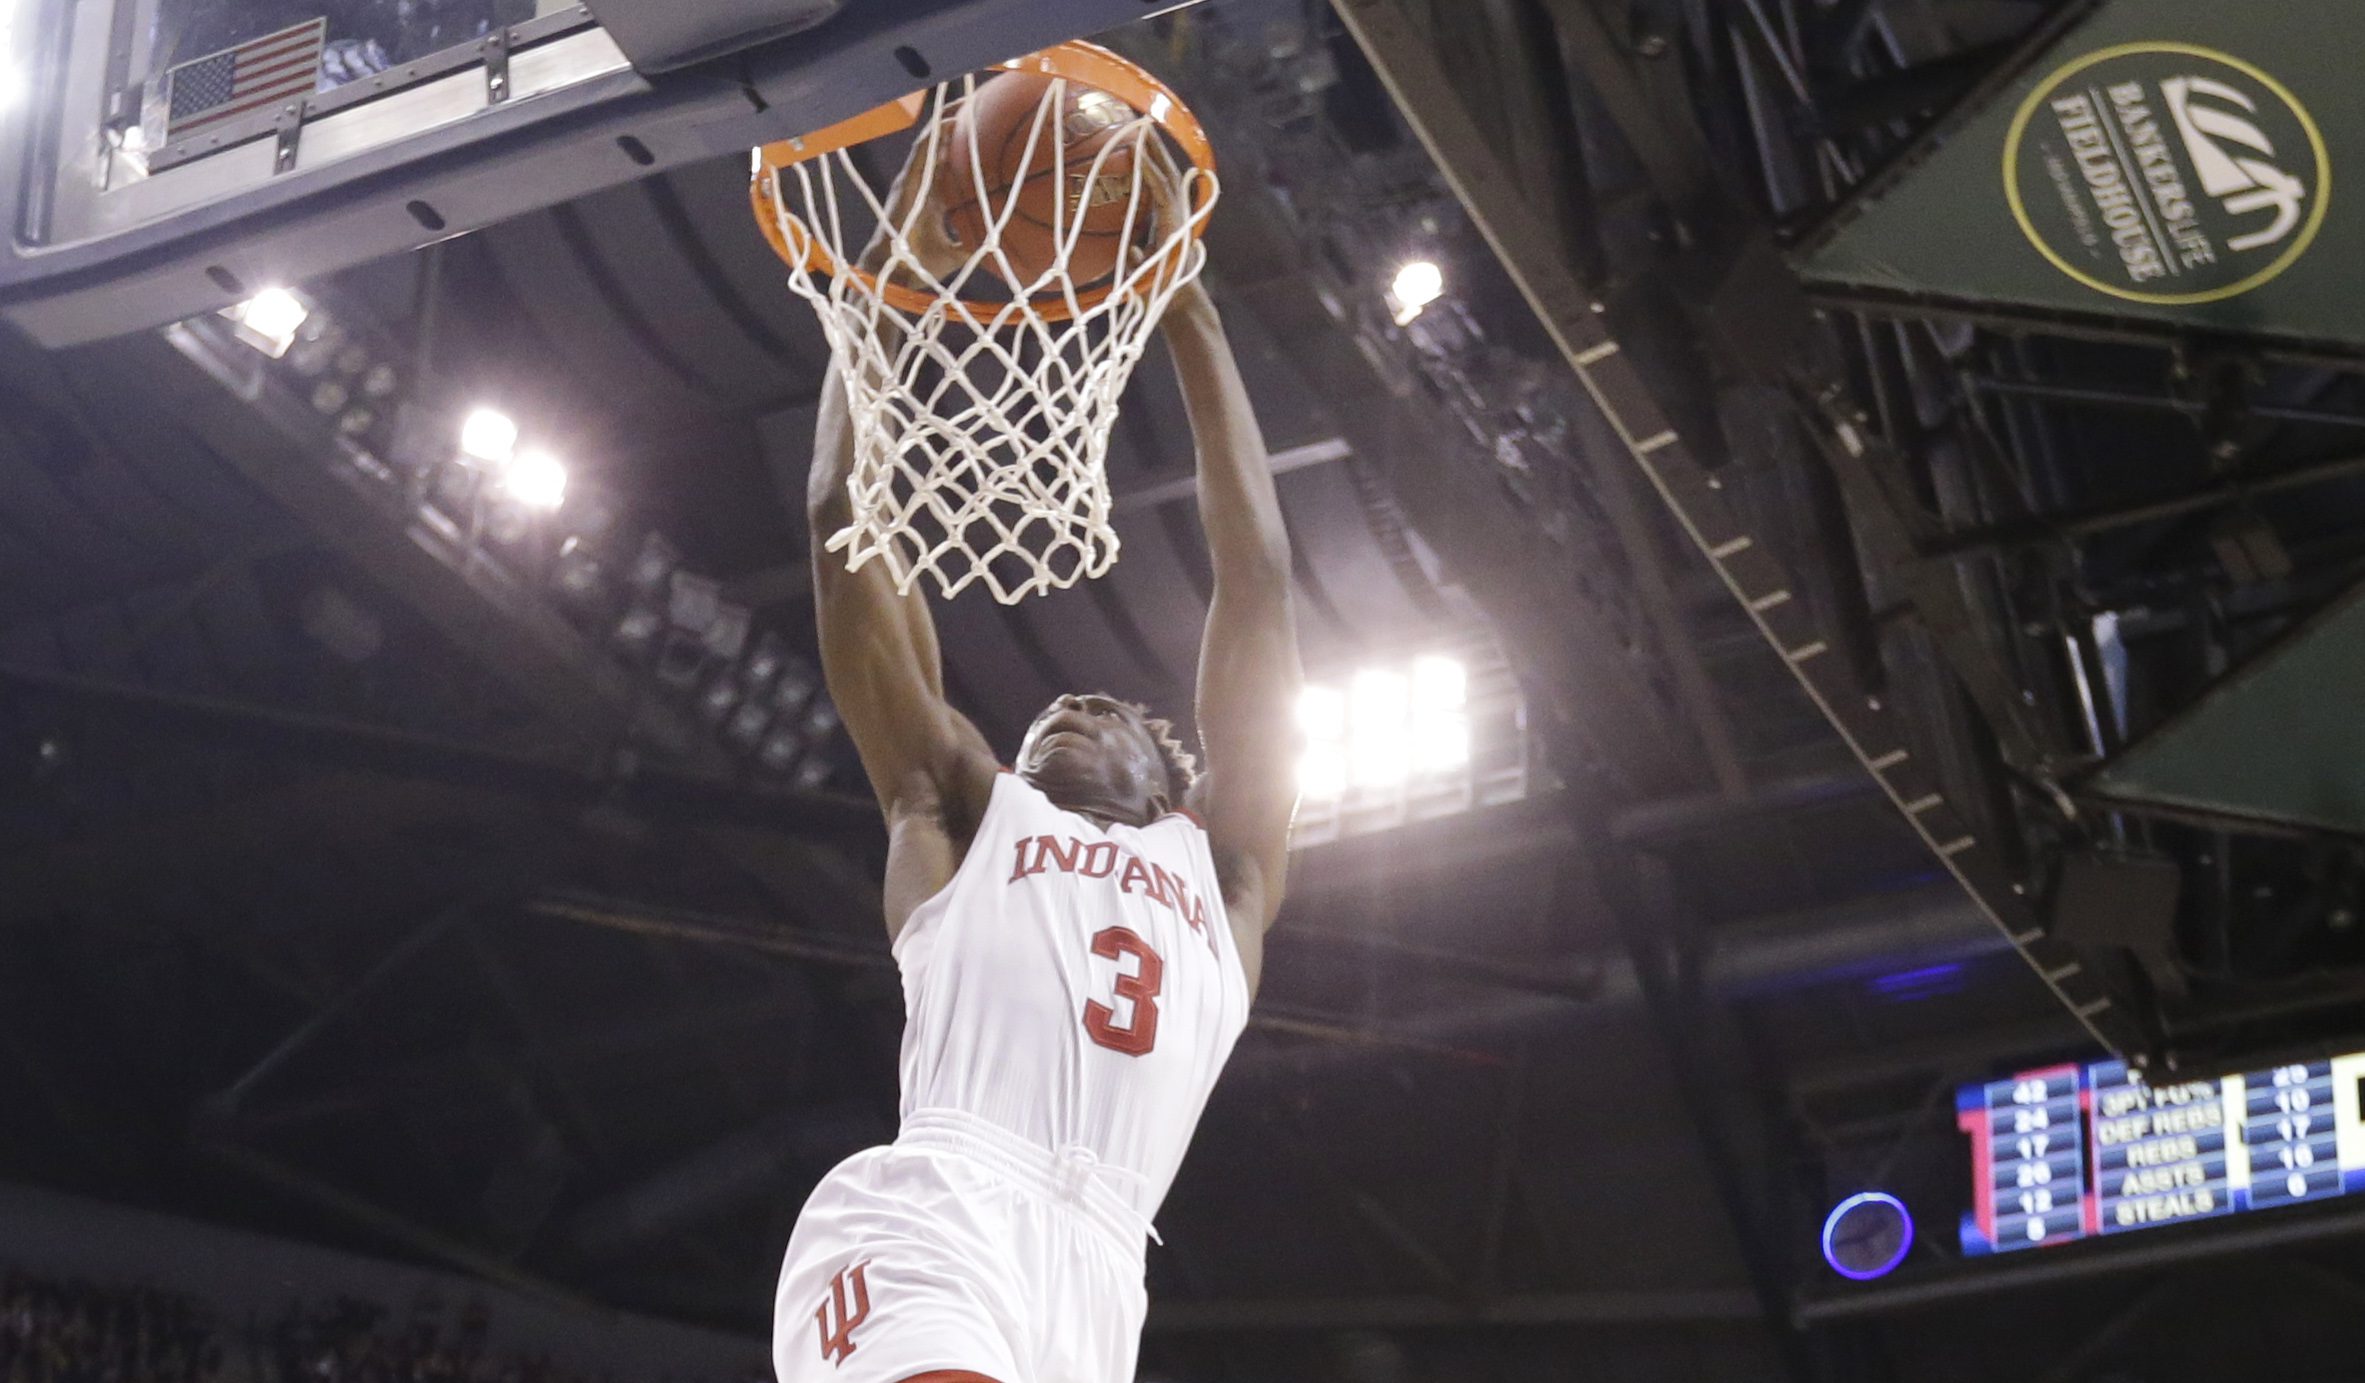 Indiana's OG Anunoby (3) dunks in the second half of an NCAA college basketball game against the Michigan in the quarterfinals at the Big Ten Conference tournament, Friday, March 11, 2016, in Indianapolis. Michigan won 72-69. (AP Photo/Michael Conroy)